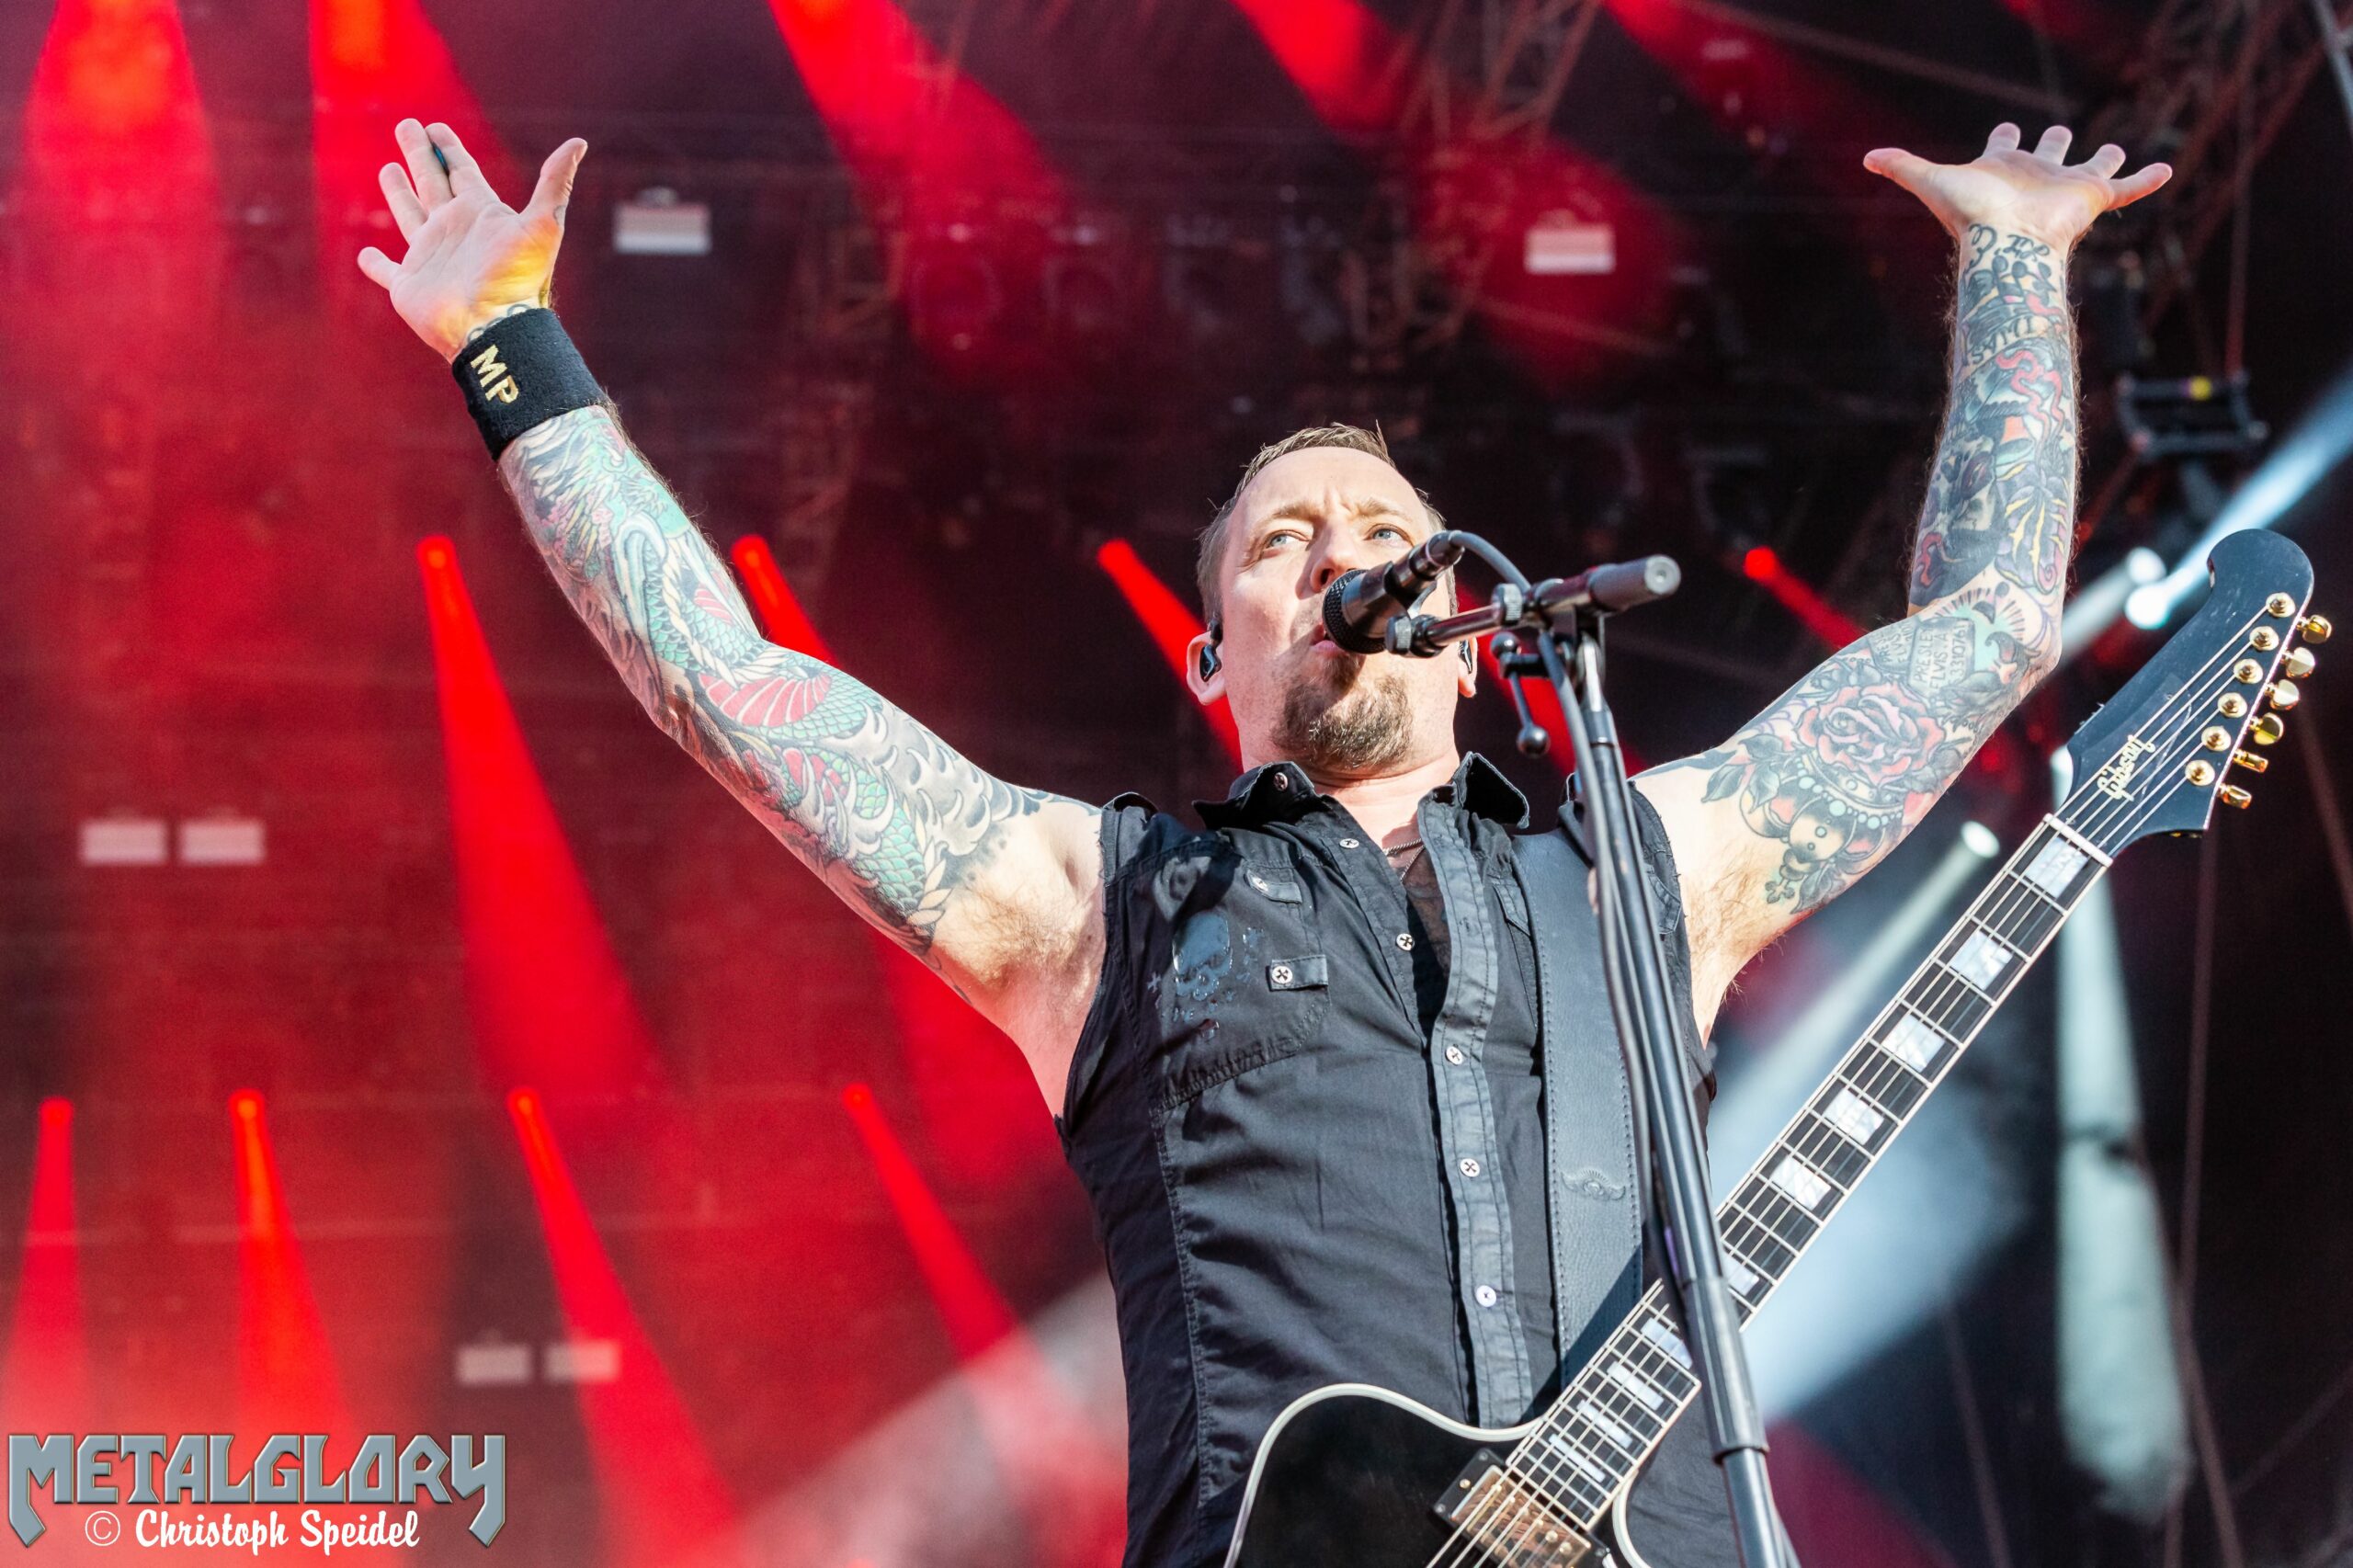 Volbeat & Mercyful Fate “Servant Of The Road World Tour”, 02.06.2022, Expo Plaza, Hannover